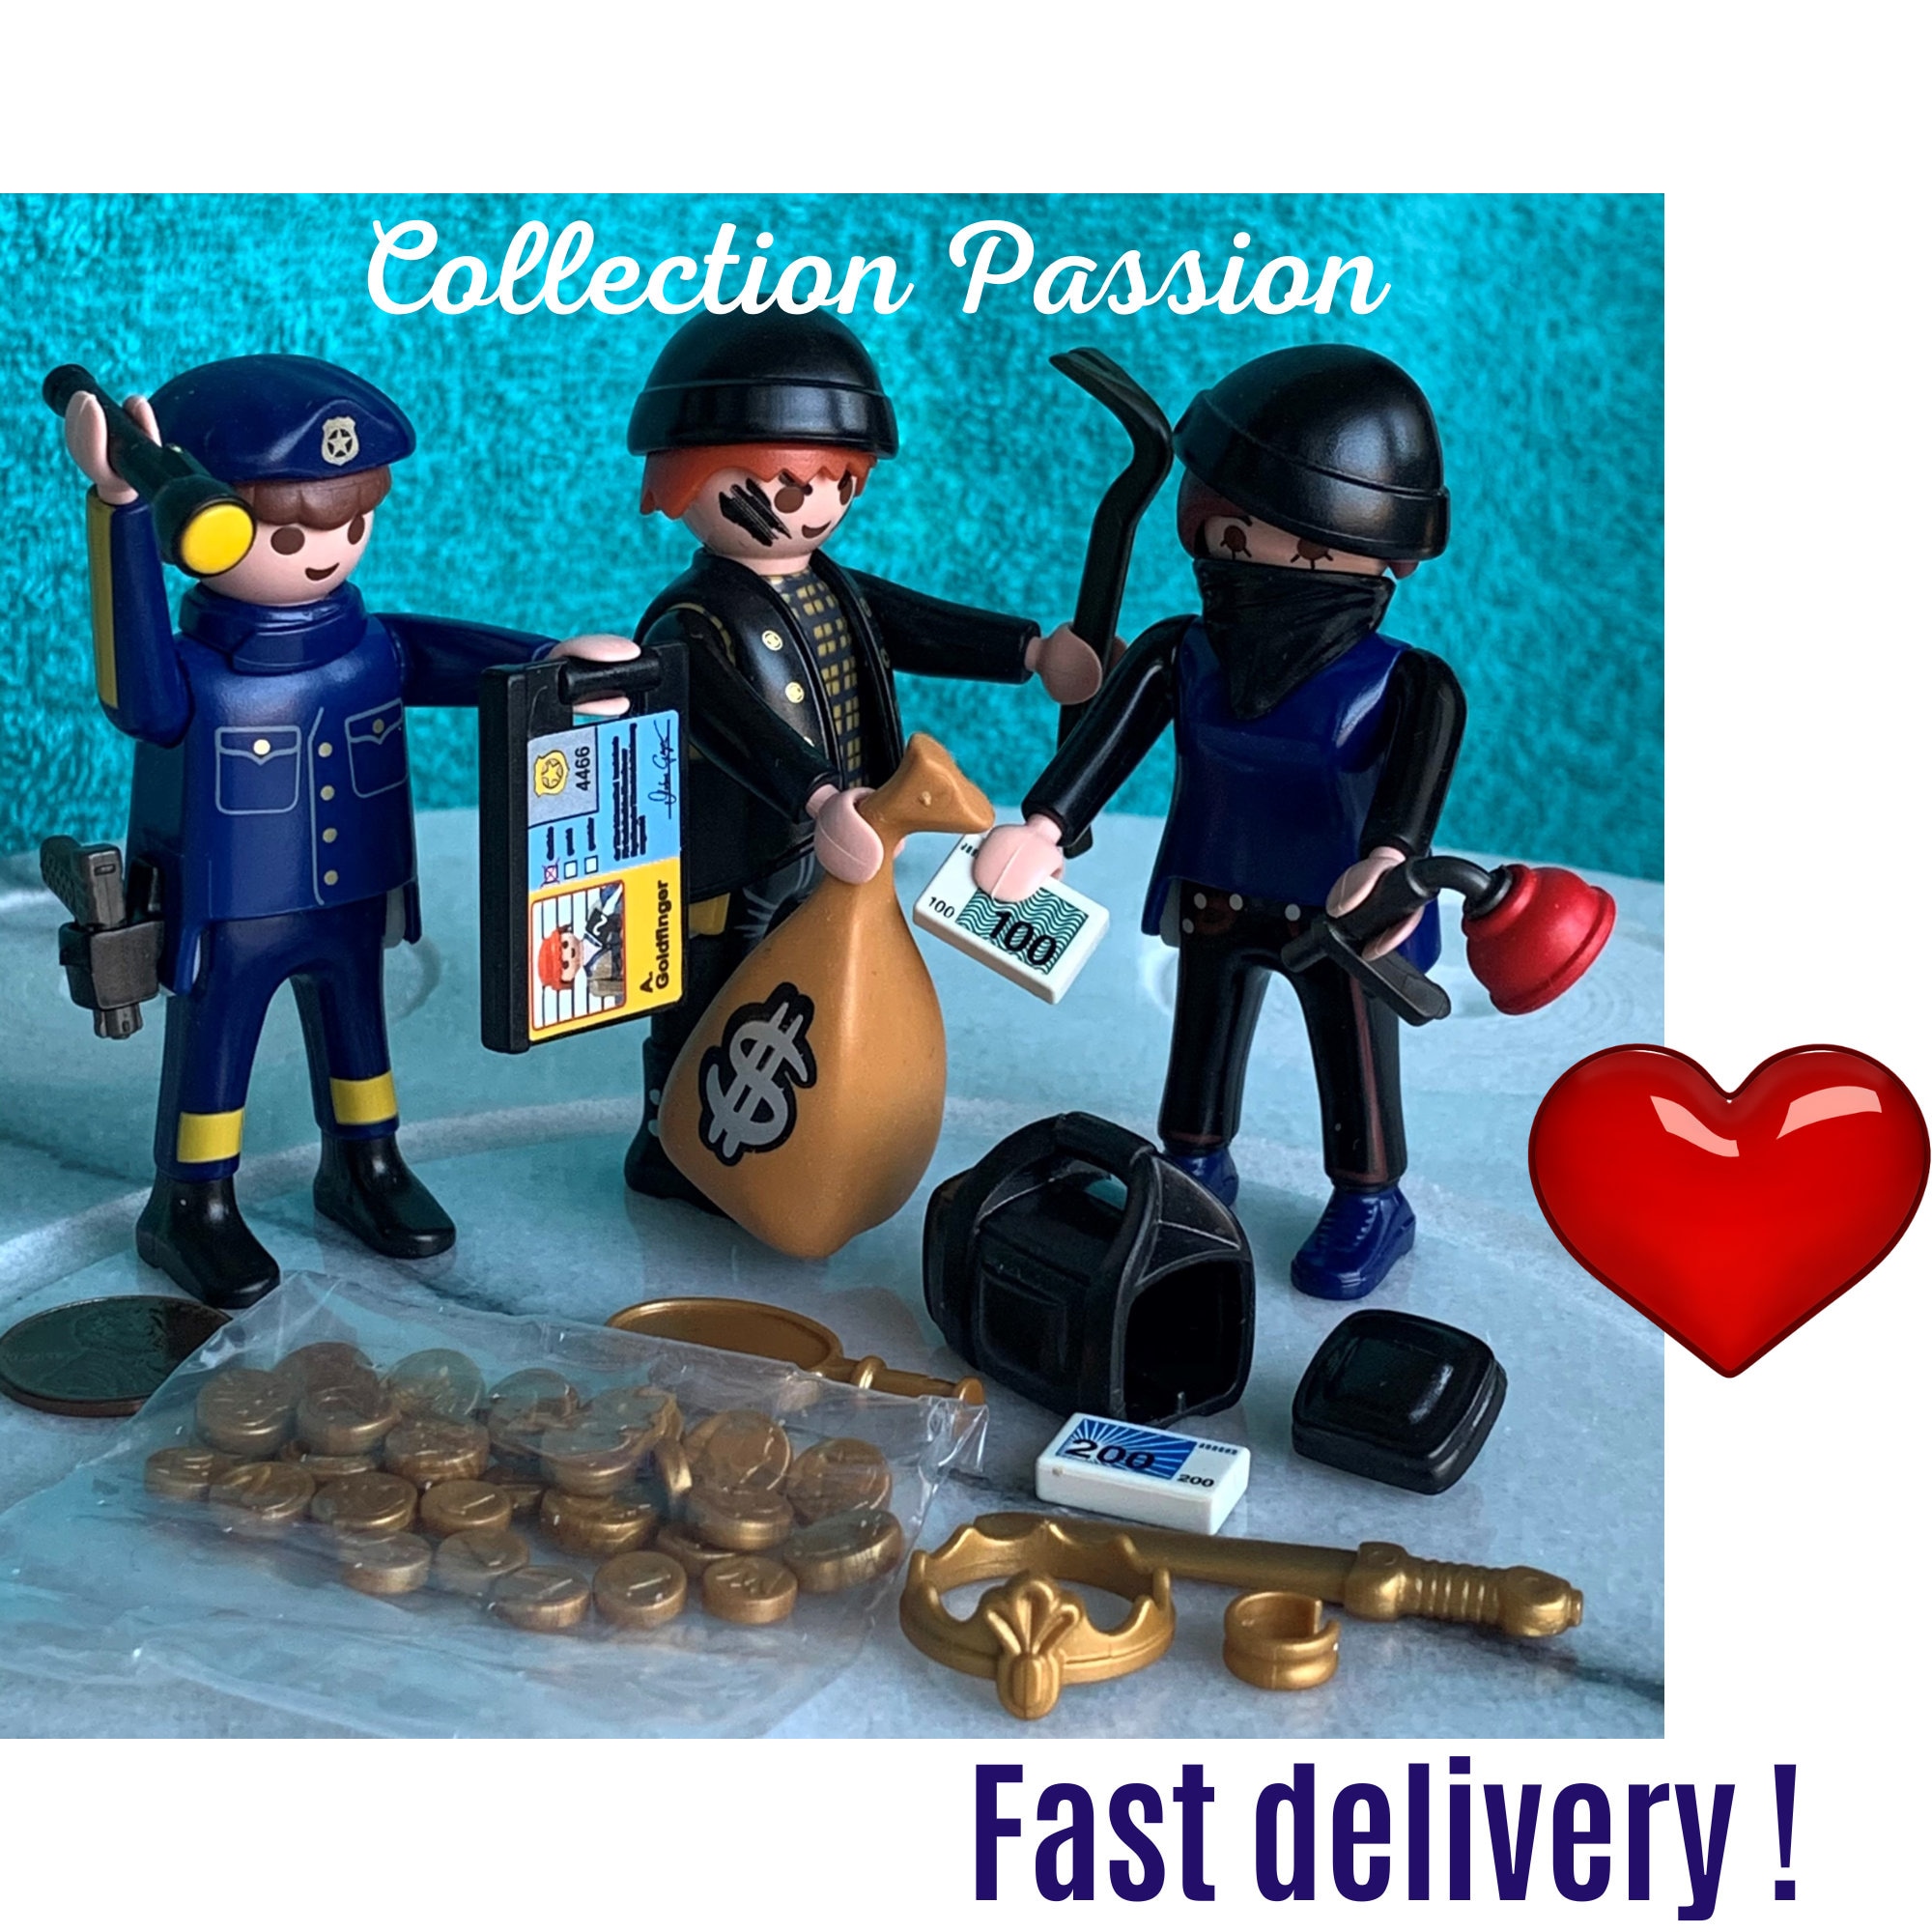 PLAYMOBIL POLICE and THIEF Action Figure Toy, Bank Bandit Robbers